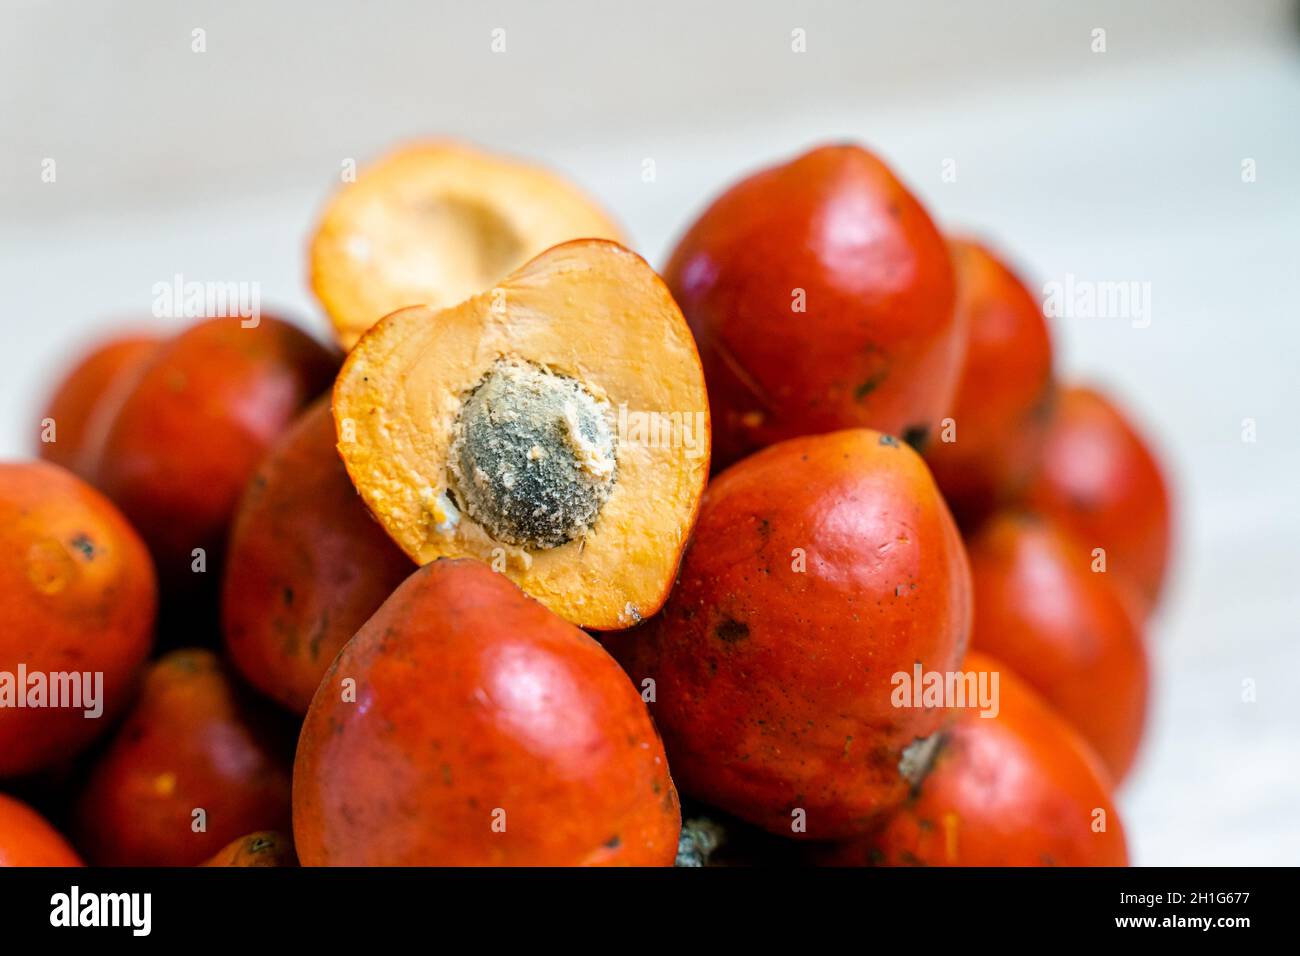 Halved chontaduro fruit with a core; popular plant in Ecuador Stock Photo